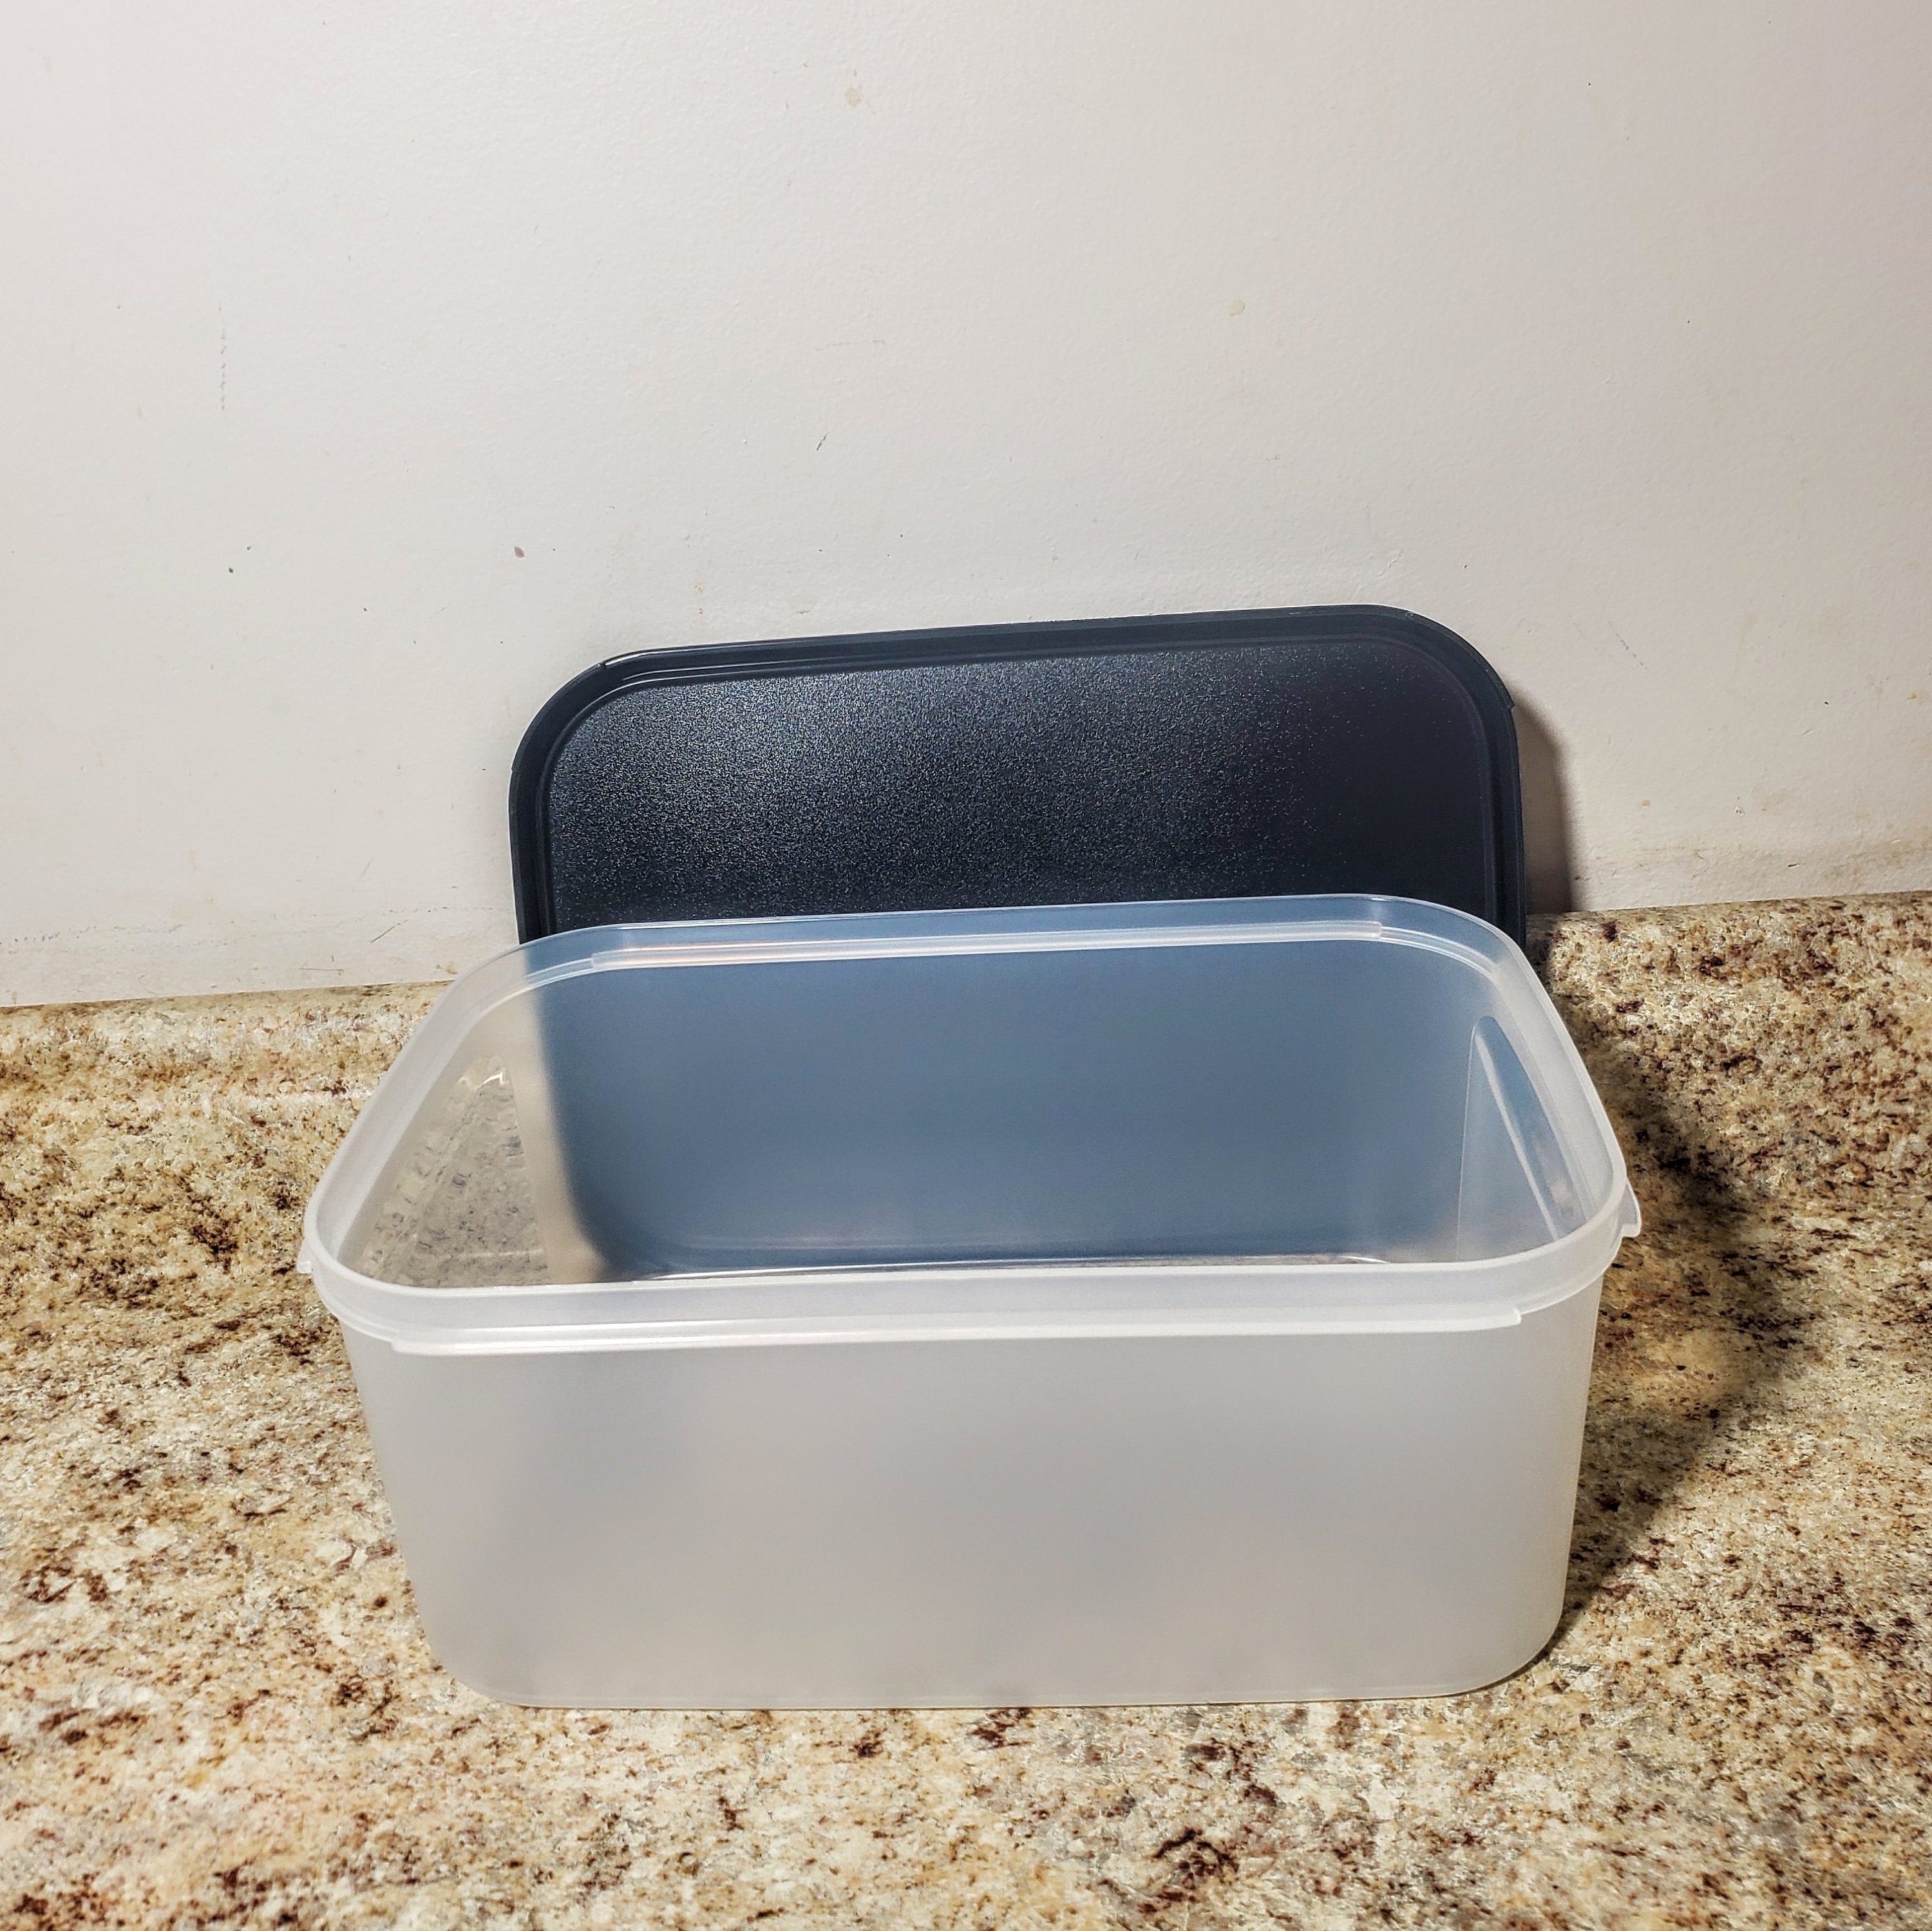 New TUPPERWARE CLEAR Mates Square Low Storage Containers 3150 Teal Blue  Seals- 4